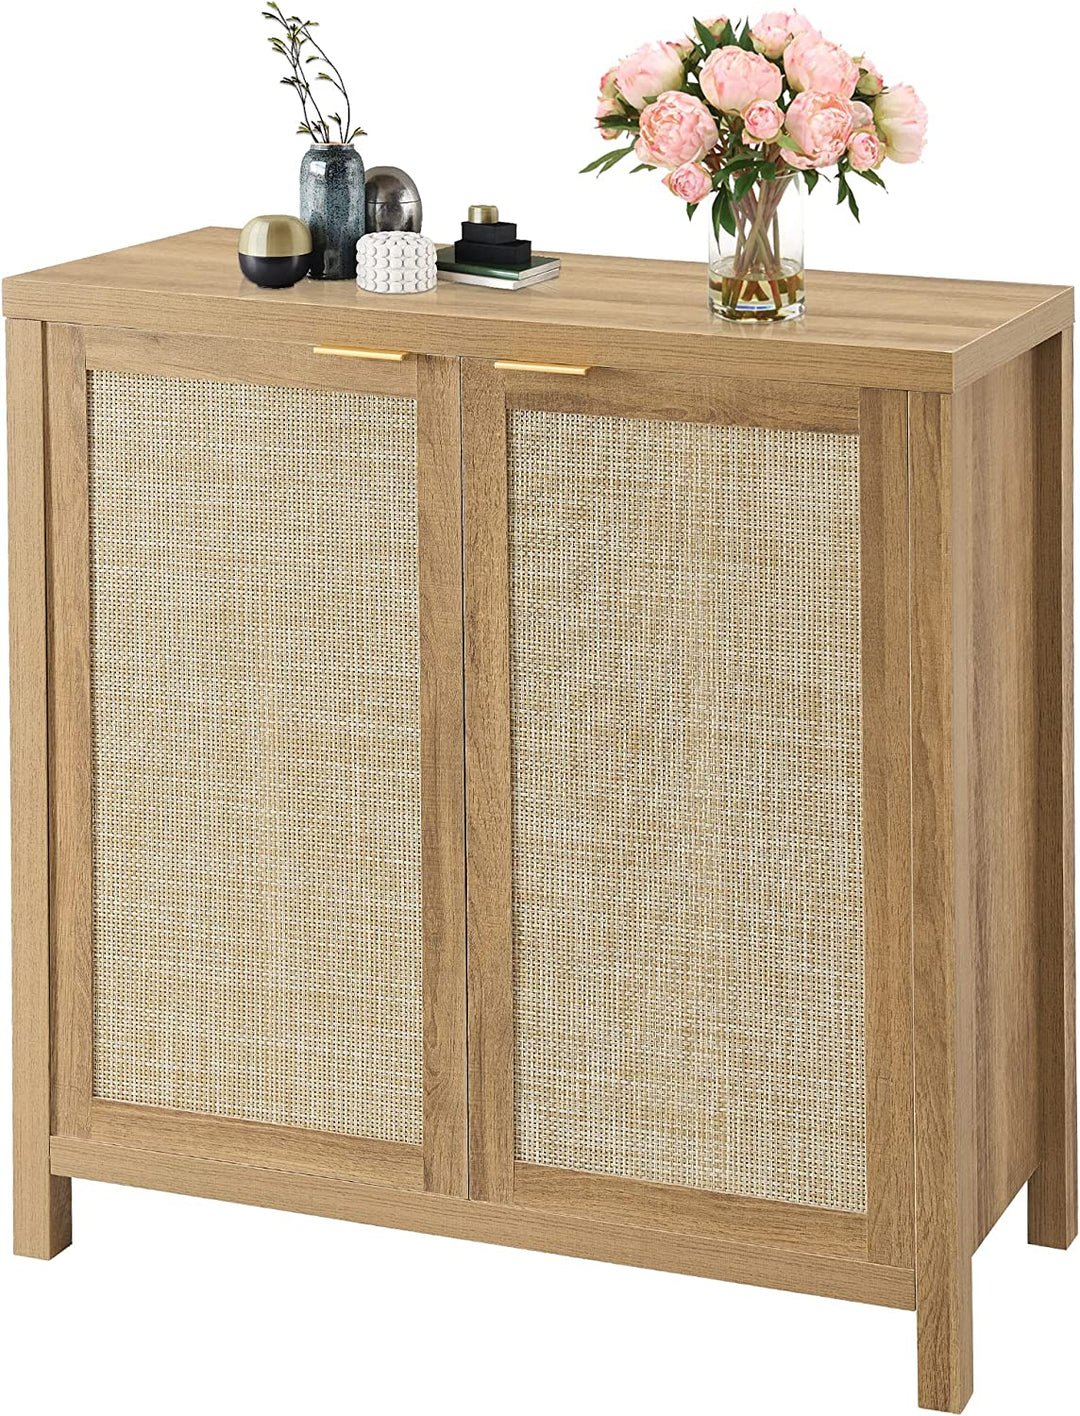 Rattan Sideboard Buffet Cabinet Set of 1，Farmhouse Kitchen Storage Cabinet with Rattan Decorated Doors